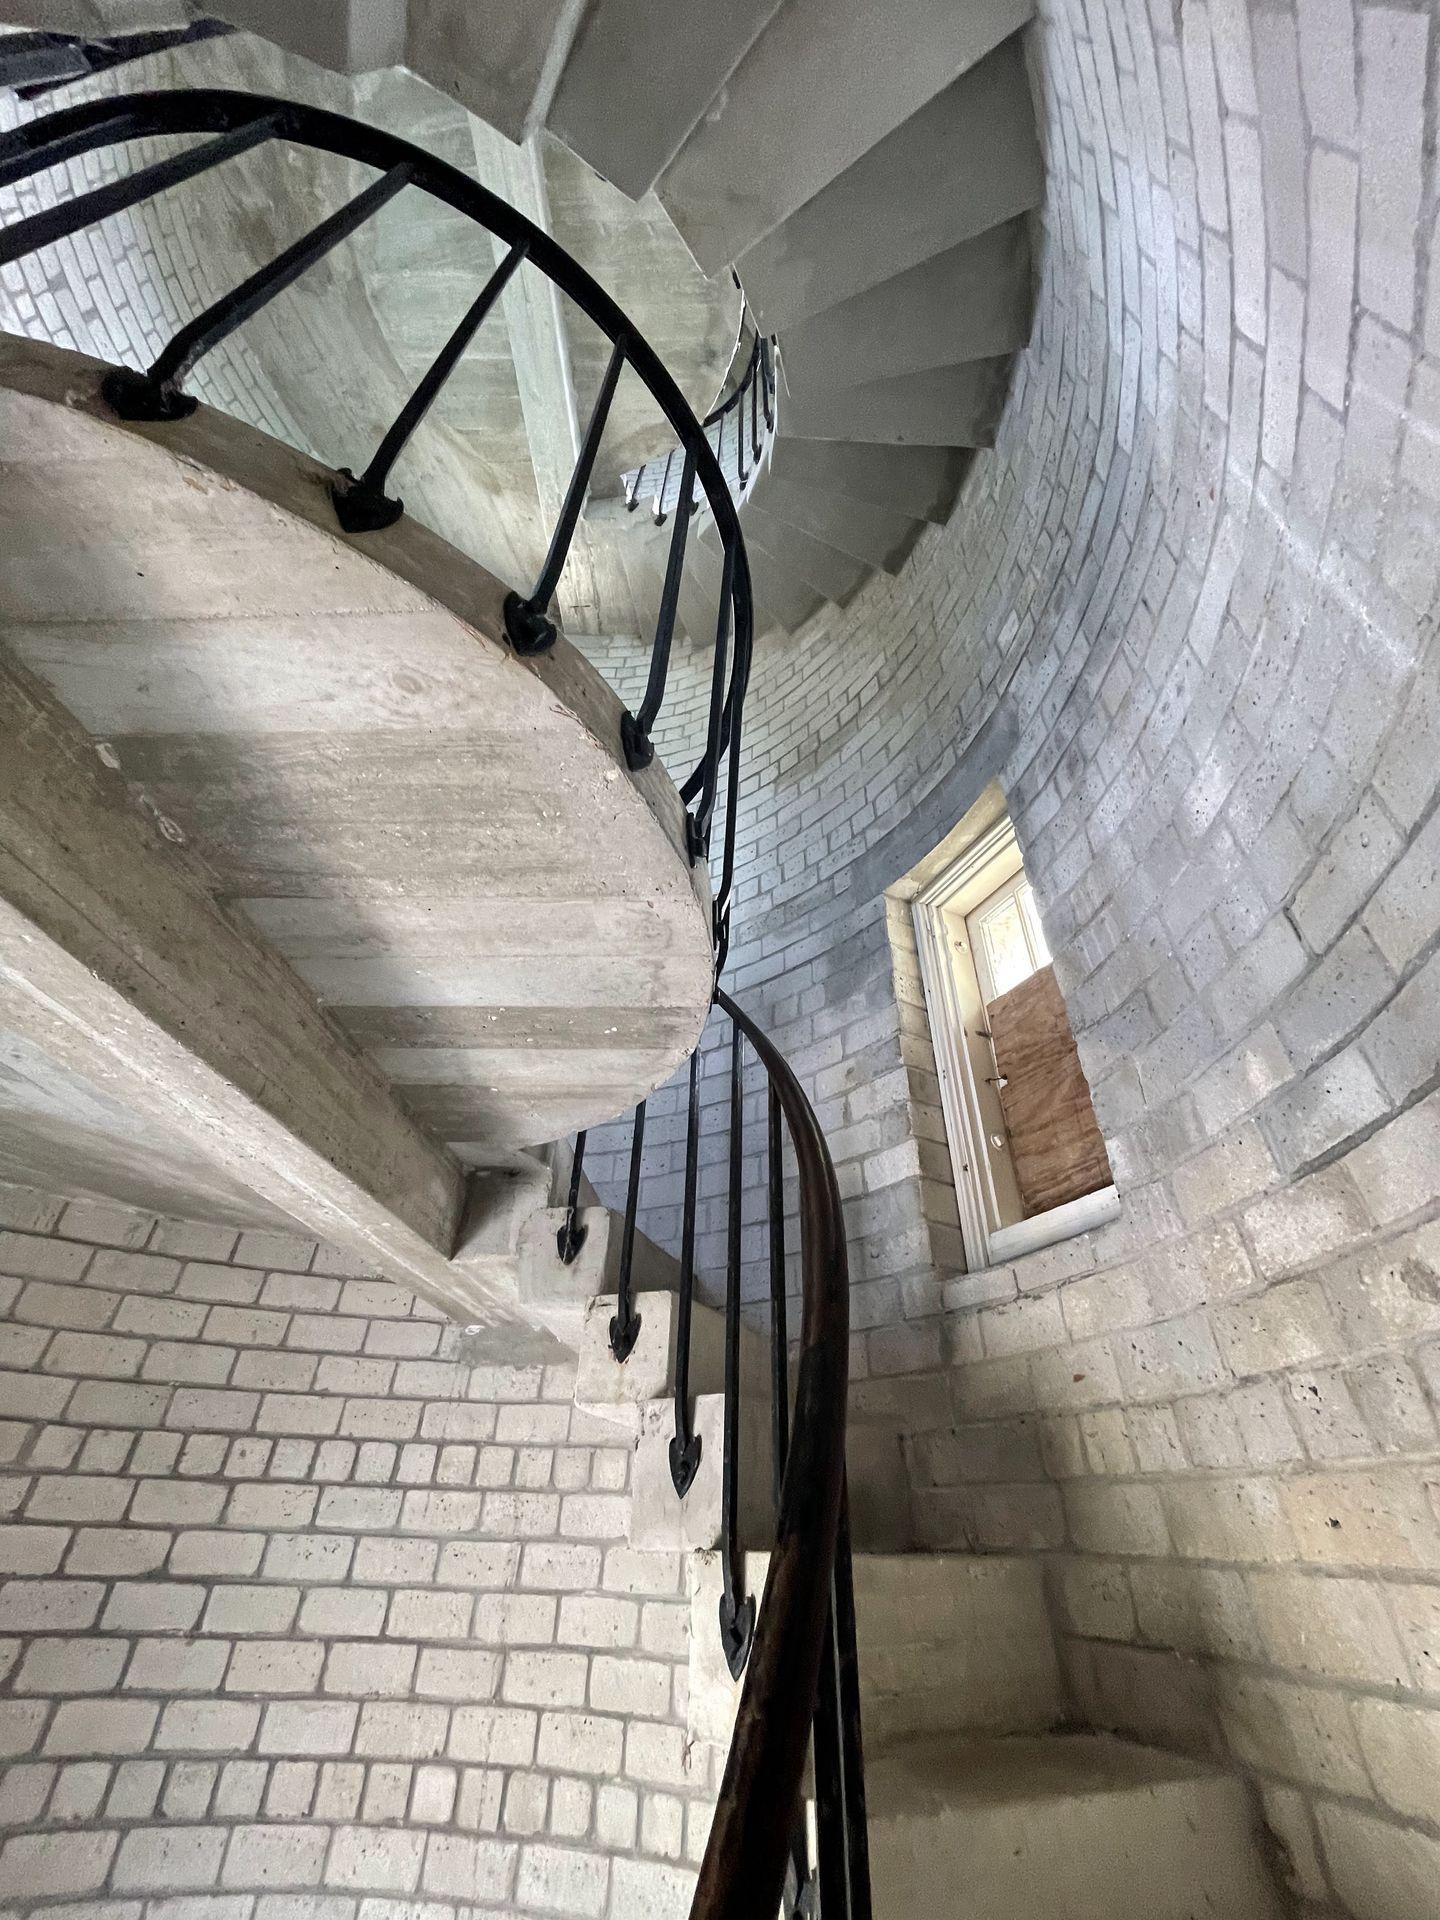 A spiral staircase inside of the lighthouse